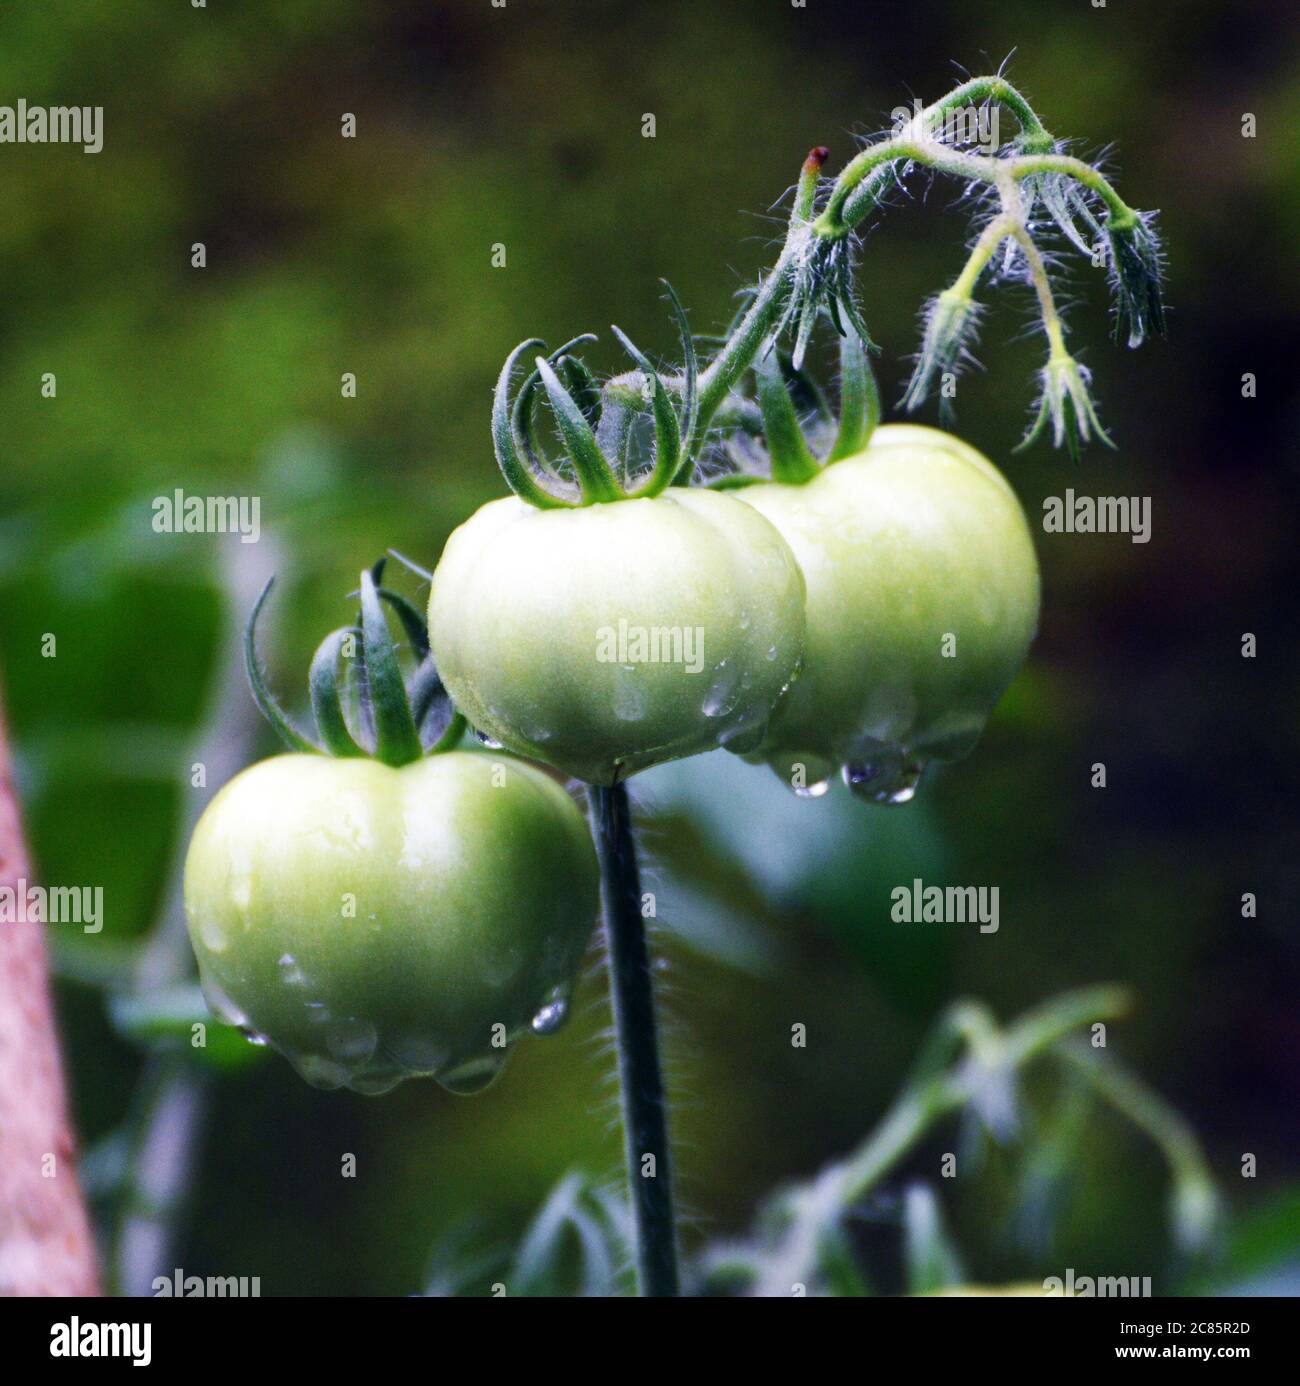 Solanum lycopersicum or Green tomato in morning sunlight with water drops on it Stock Photo